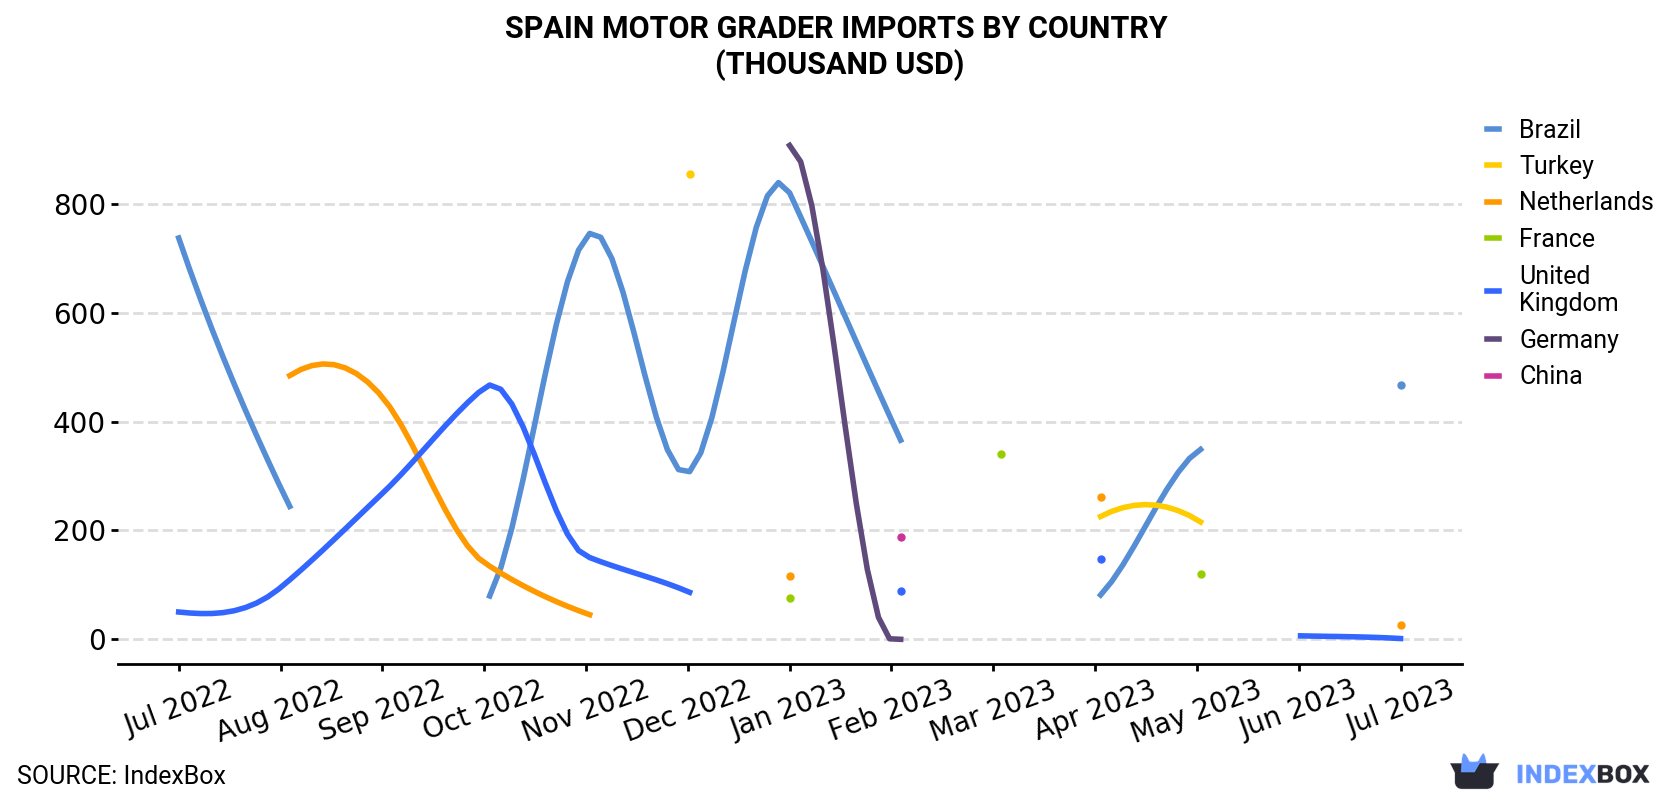 Spain Motor Grader Imports By Country (Thousand USD)